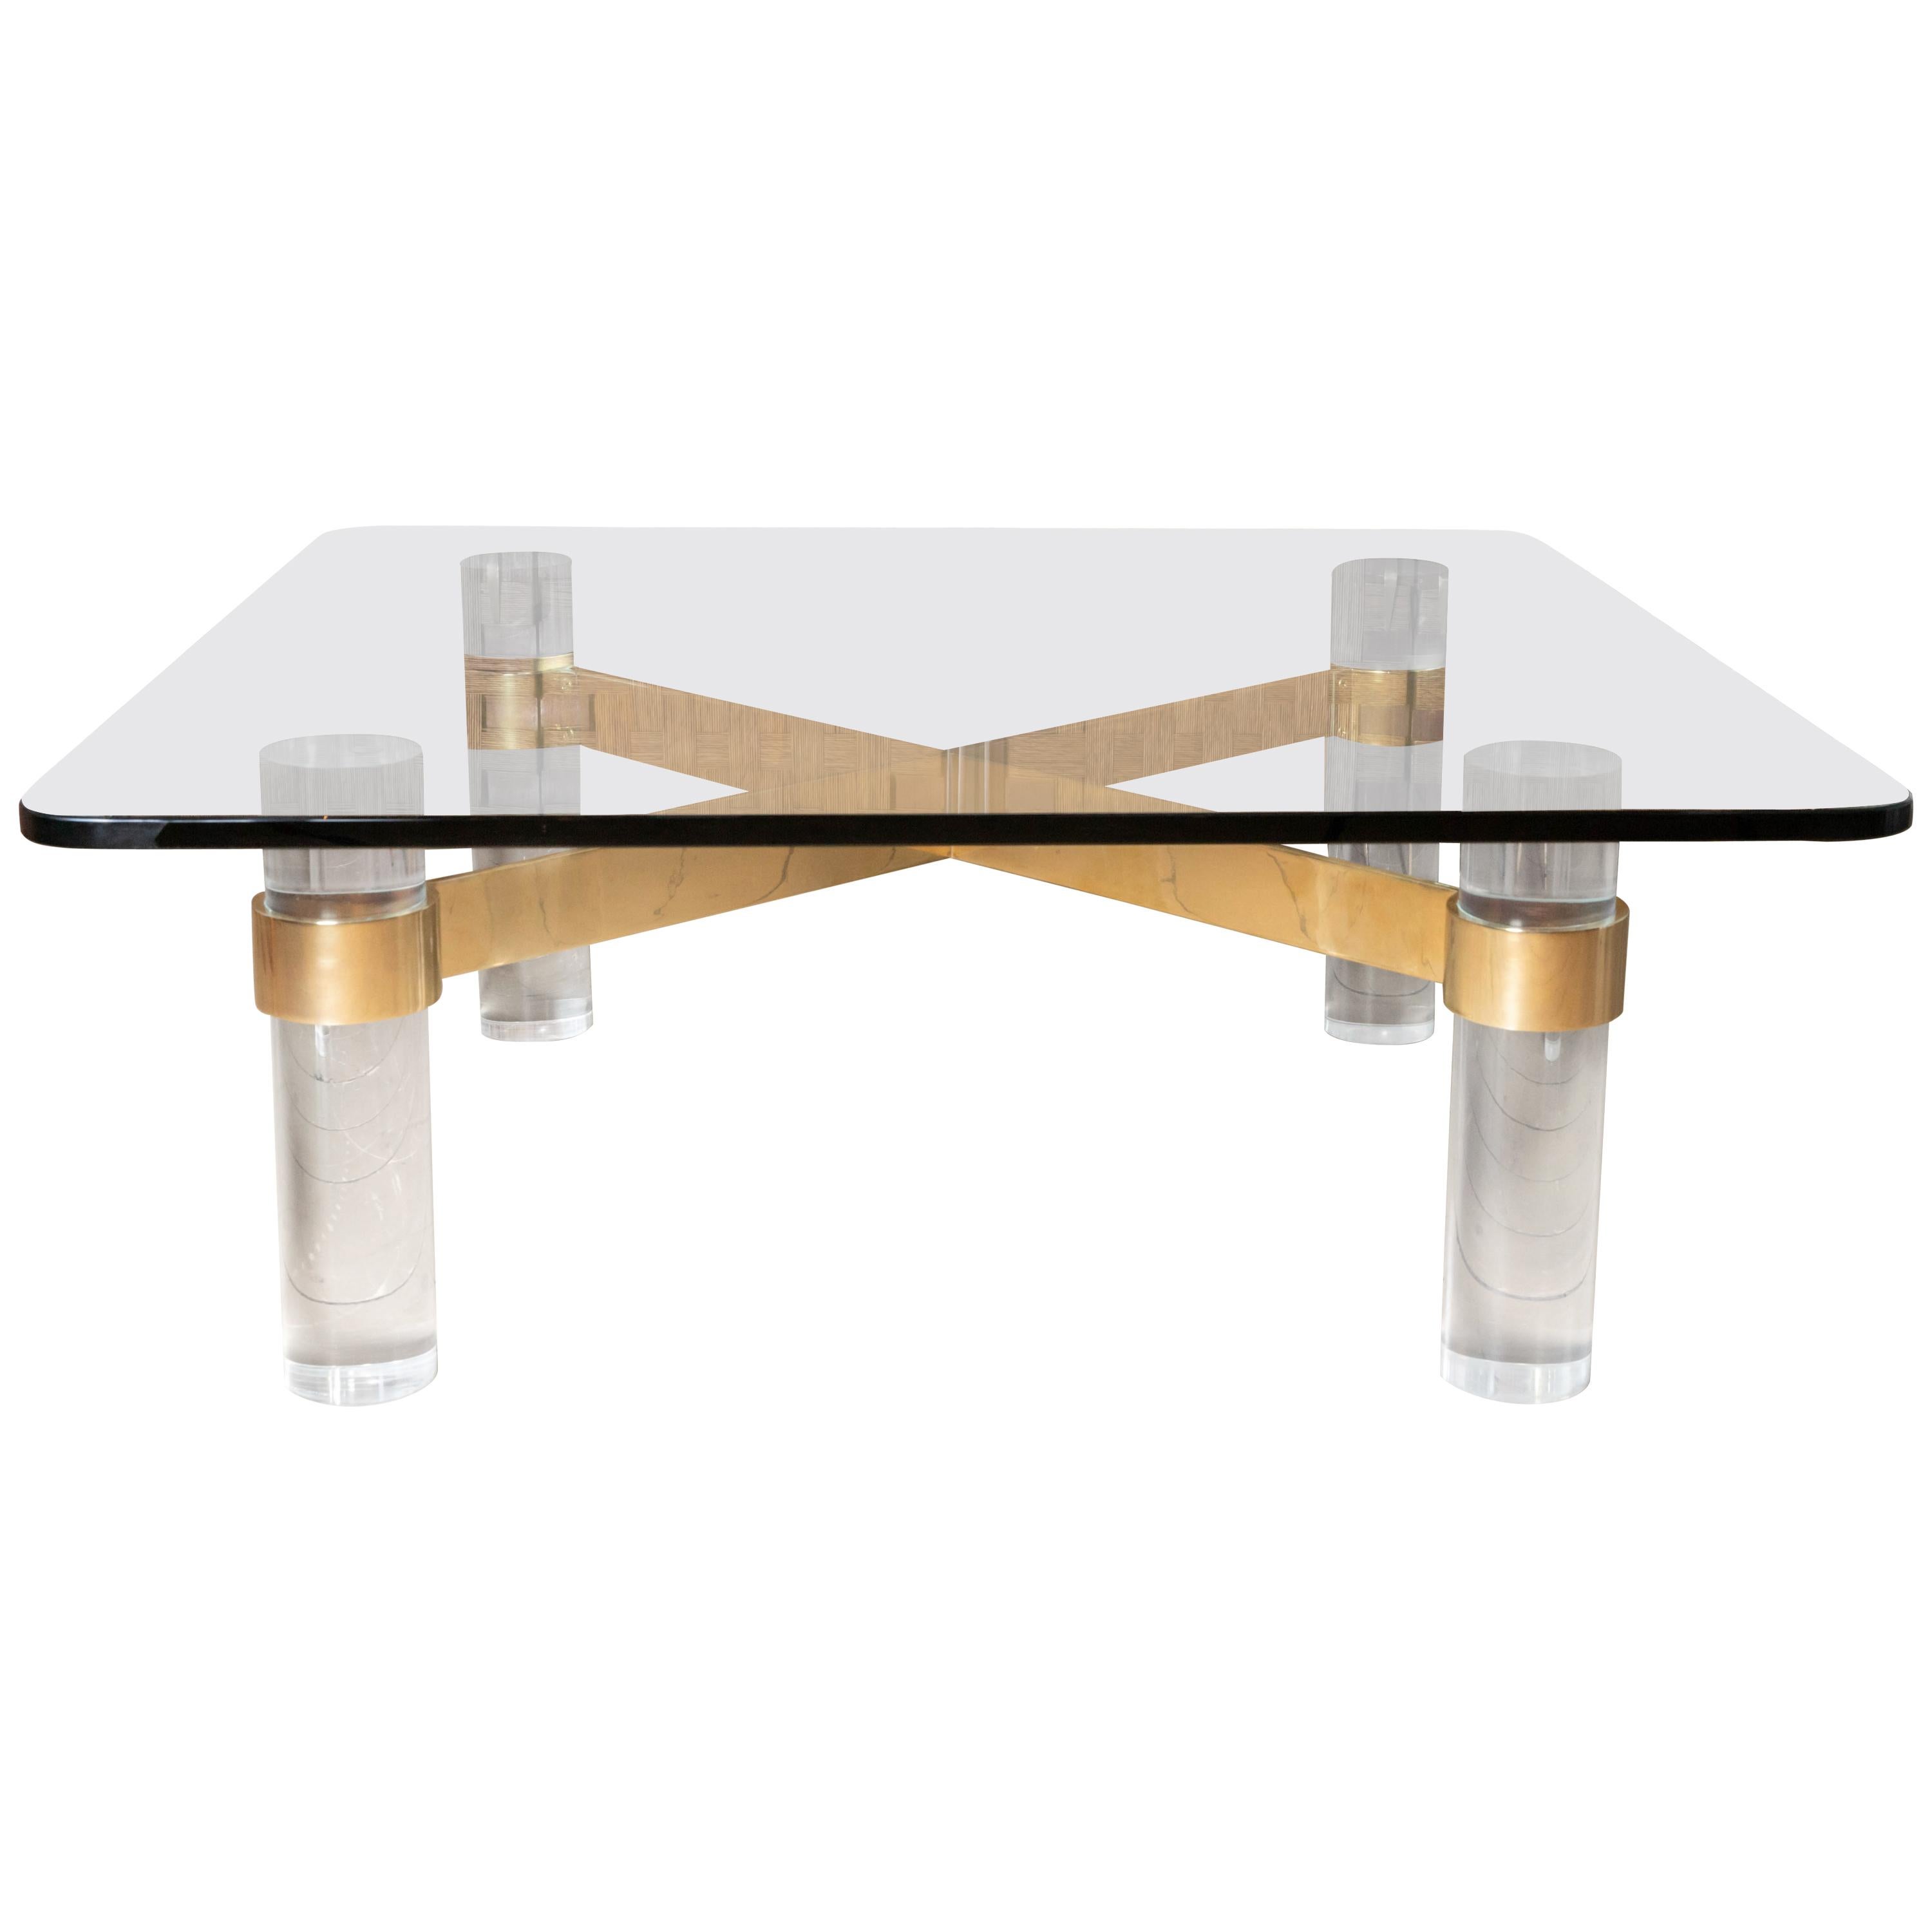 Lucite Colulmns, Brass Cross Bars Base and Glass Top Coffee Table, Karl Springer